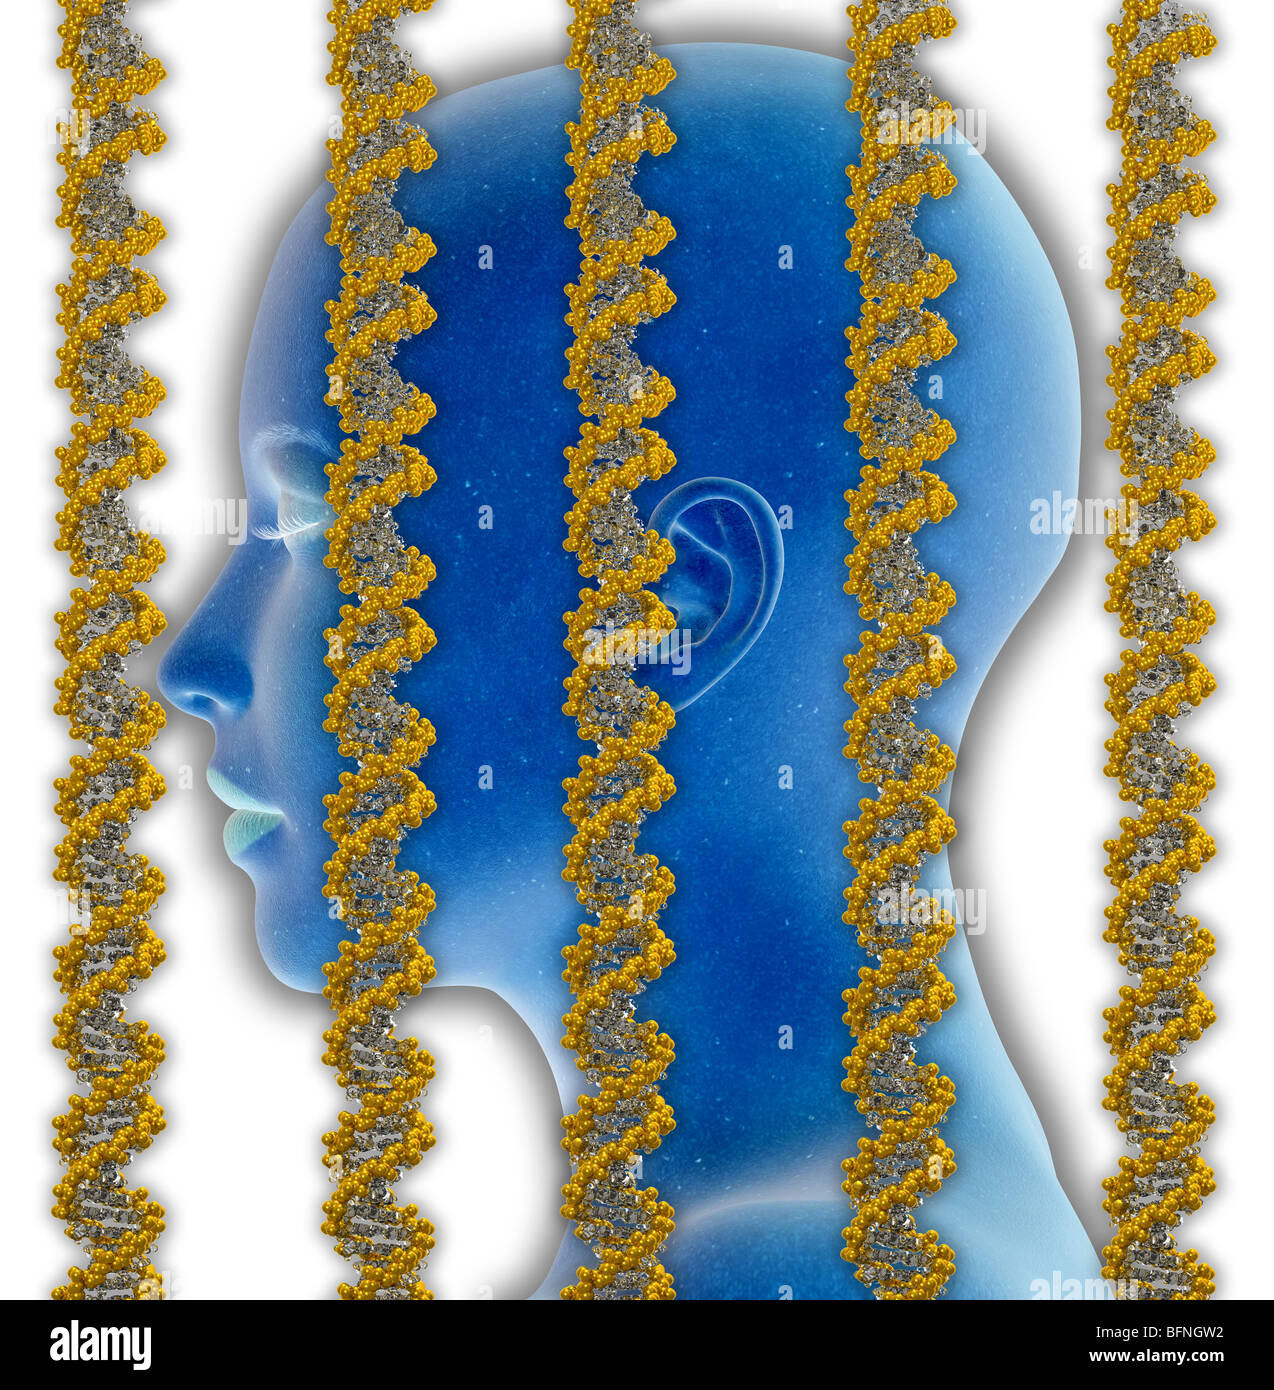 Illustration of DNA strands superimposed over a woman's face Stock Photo